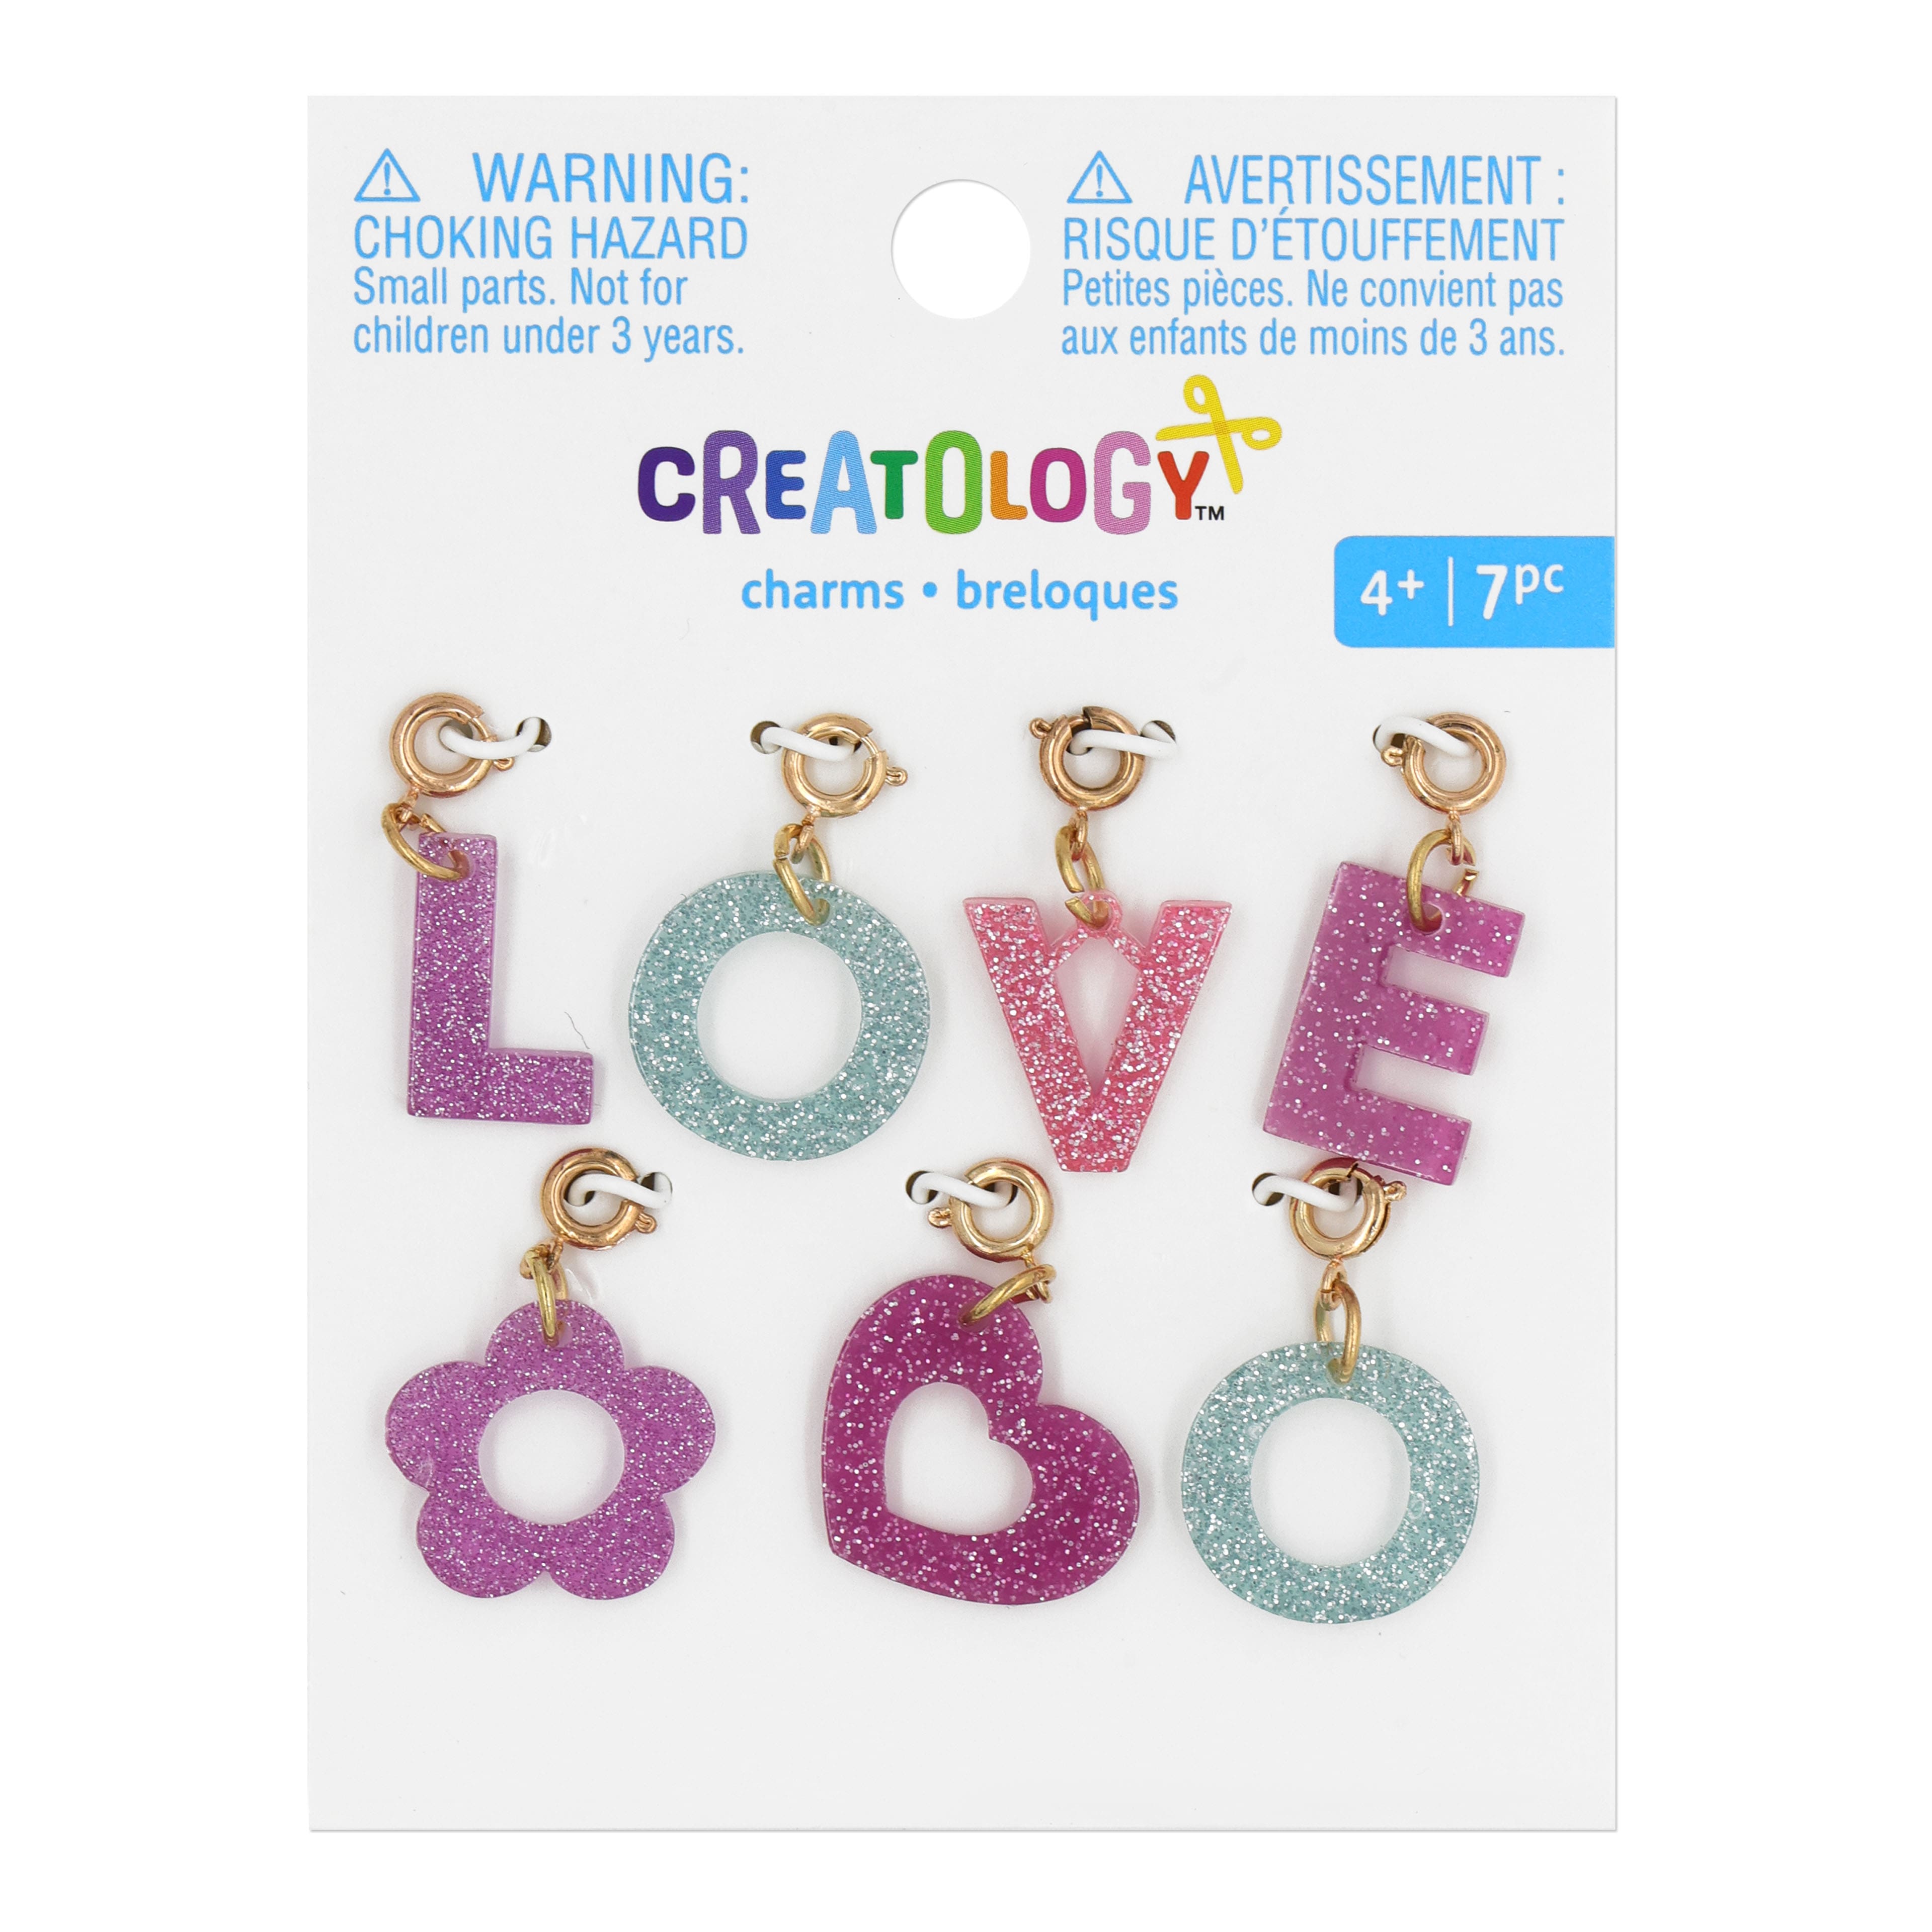 12 Packs: 3 ct. (36 total) Color Bottle Charms by Creatology